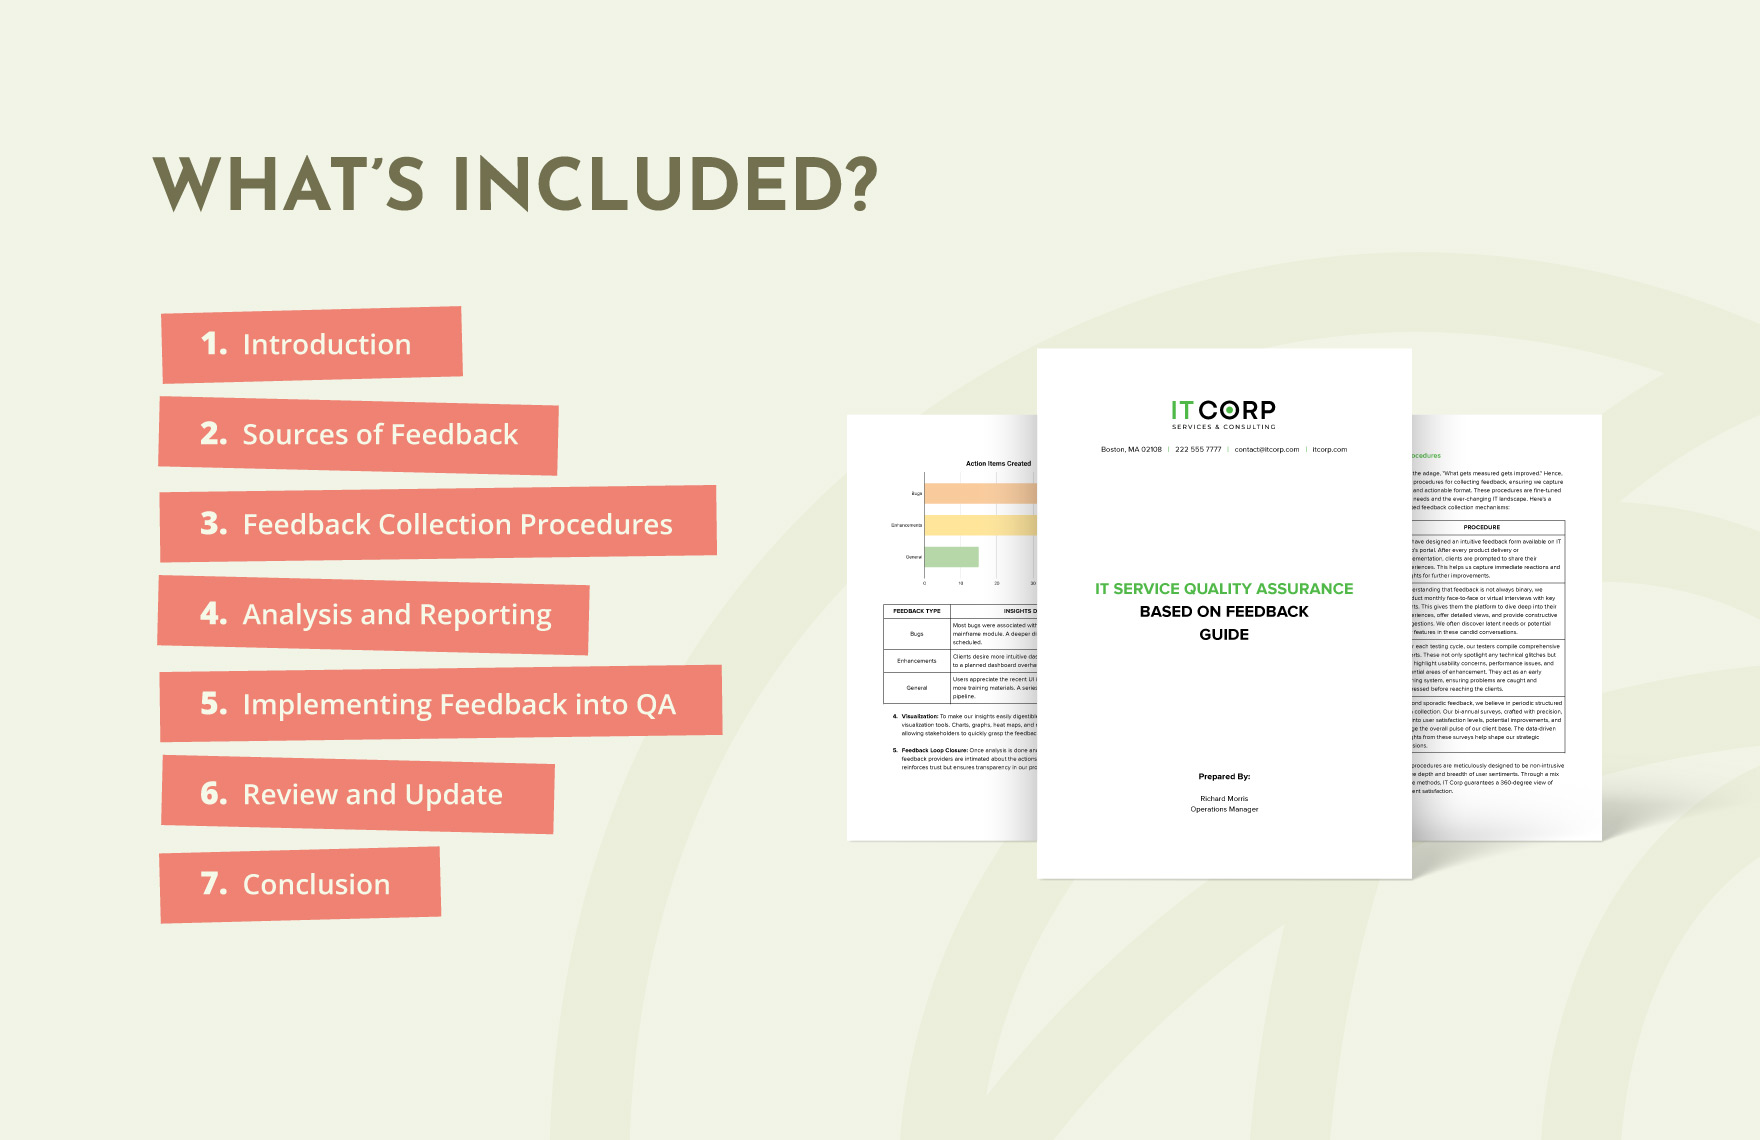 IT Service Quality Assurance based on Feedback Guide Template